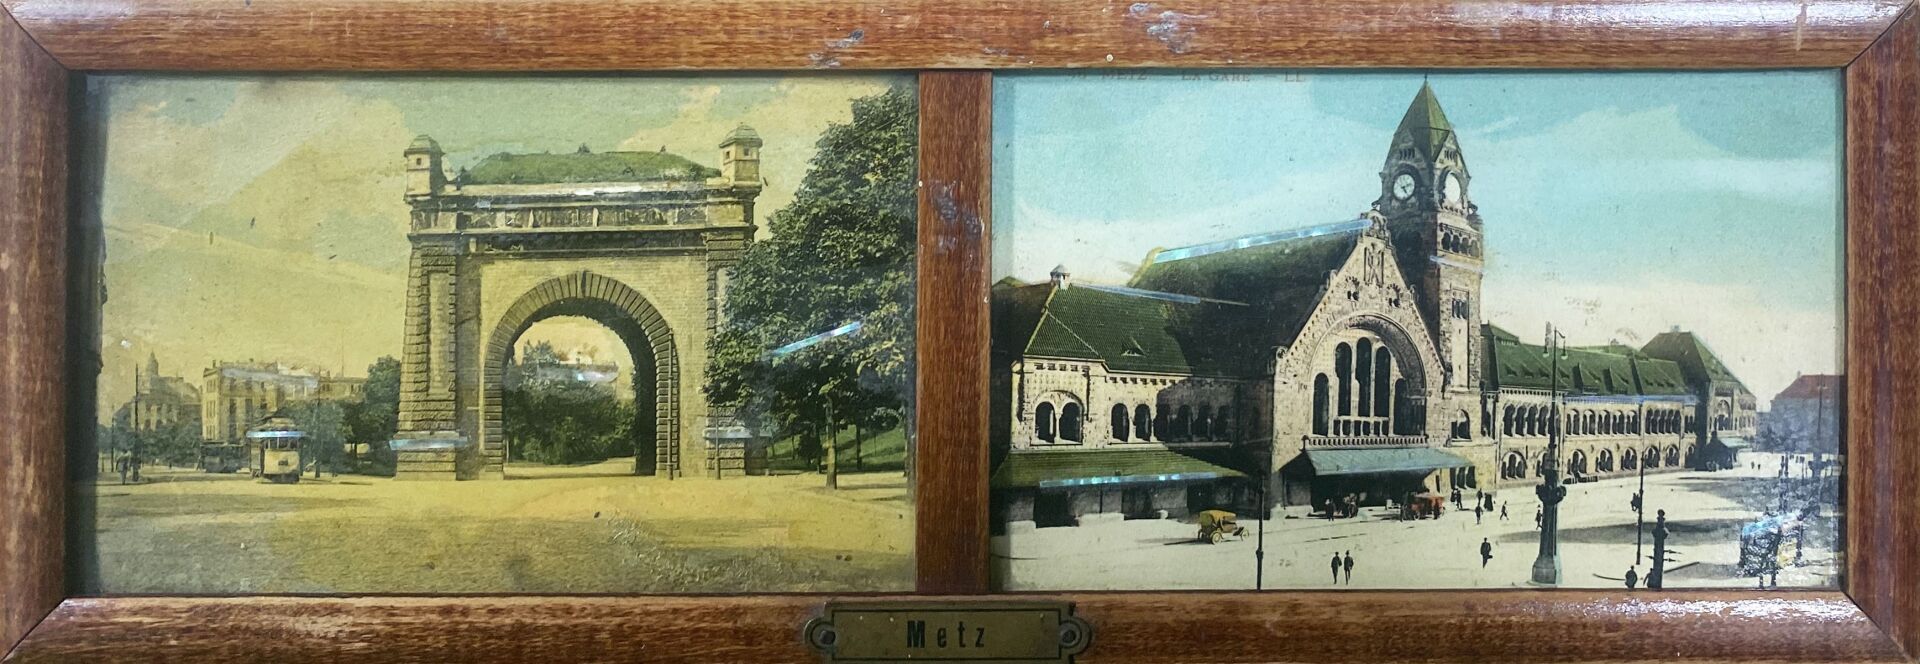 Null METZ - The Arc de Triomphe / The station

Two fixed under glass

8 x 13,5 c&hellip;